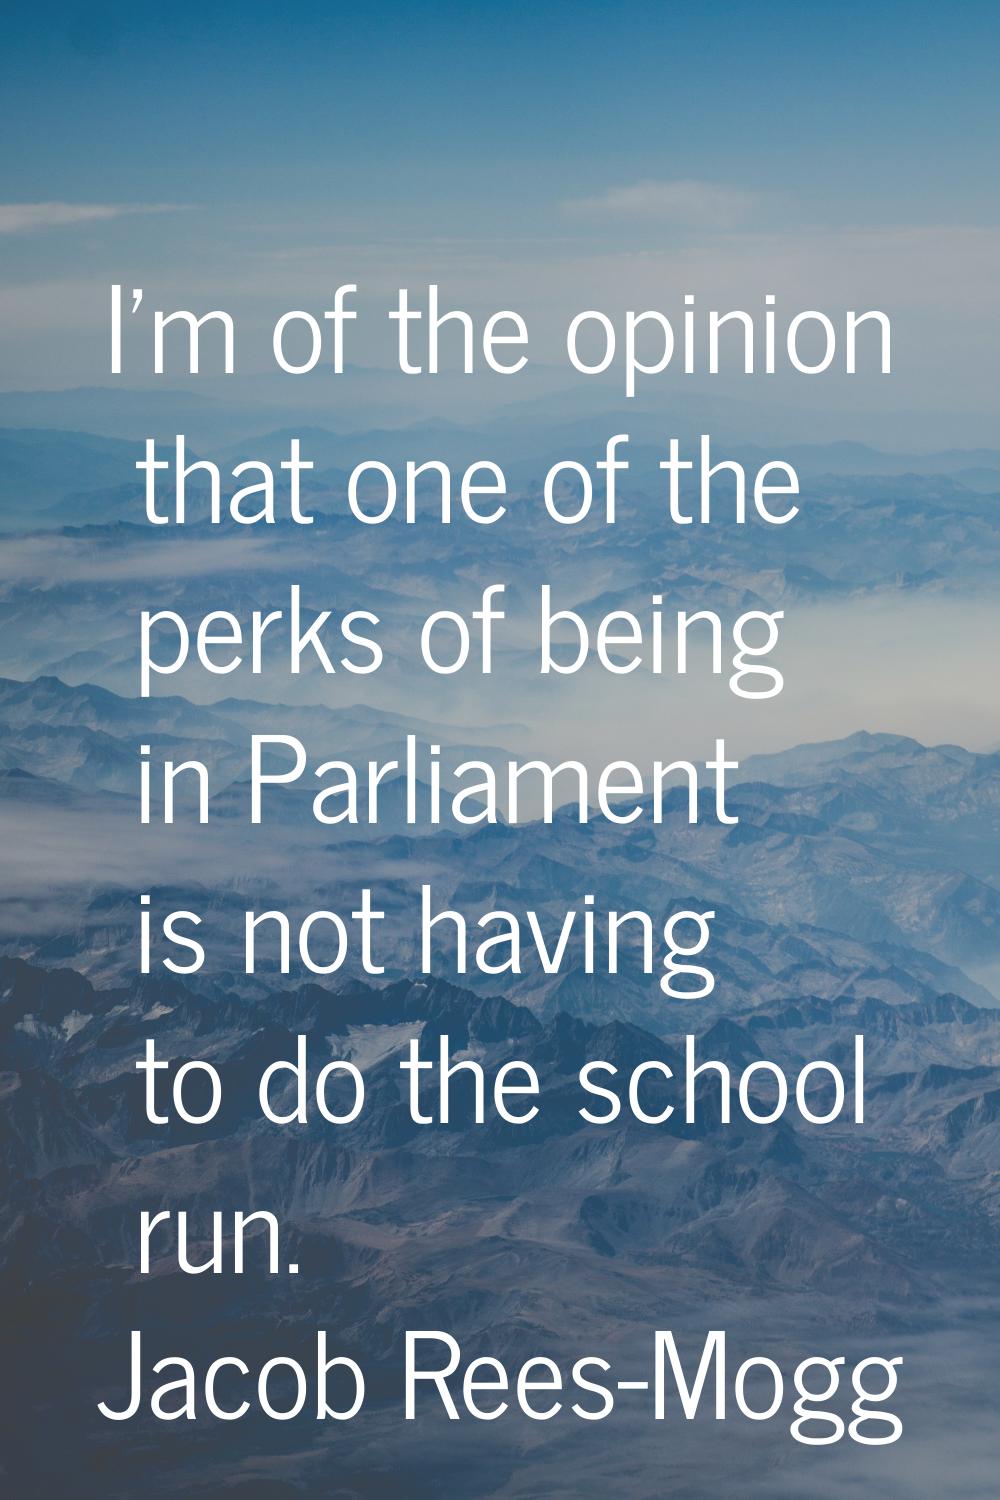 I'm of the opinion that one of the perks of being in Parliament is not having to do the school run.